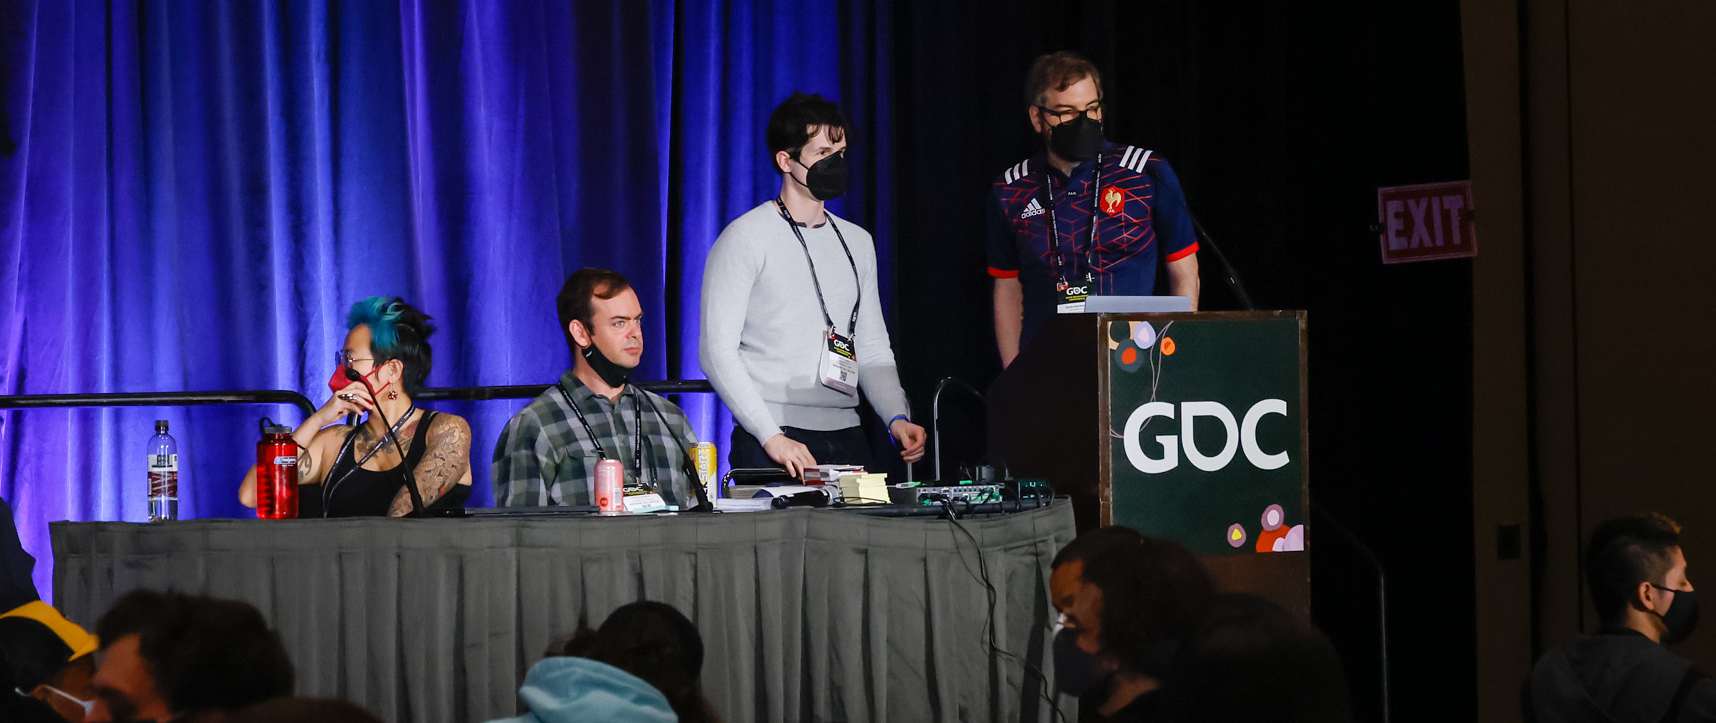 4 Panelists at GDC for our Climate Change workshop: Paula Escuadra, Chance Glasco, Trevin York, and Grant Shonkwiler, standing at the table and podium with some audience members discussing their projects below.